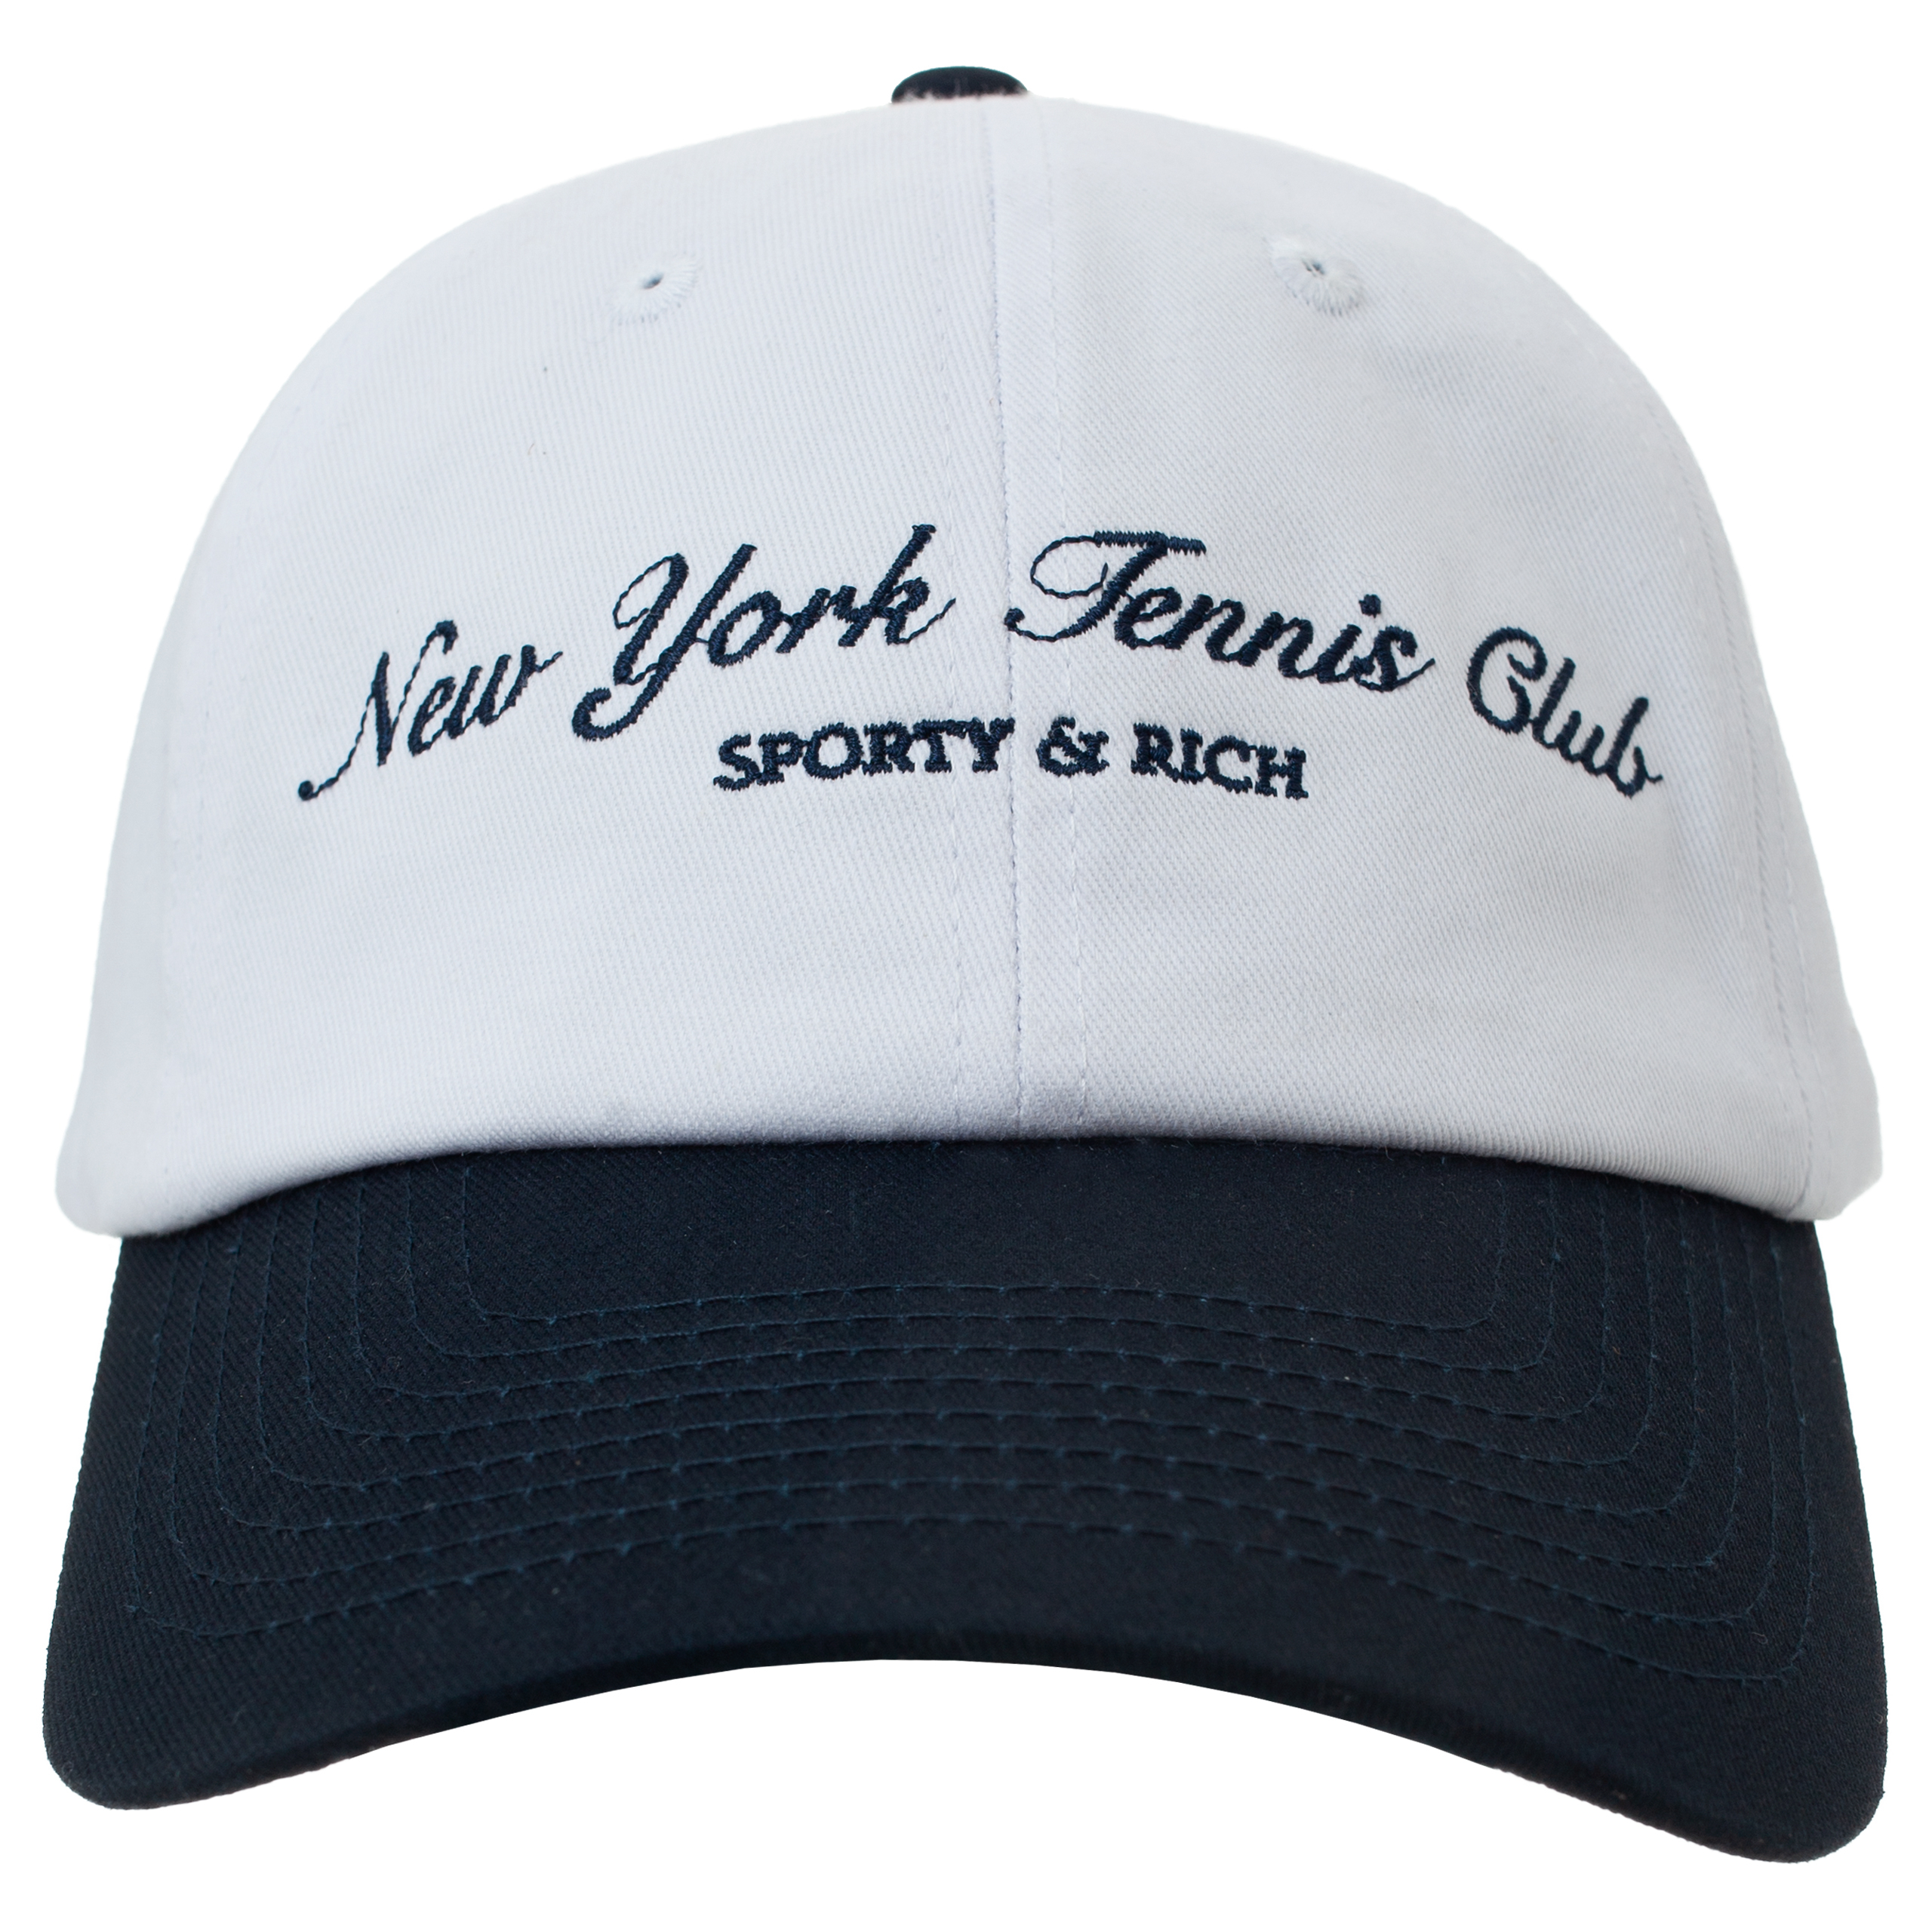 Кепка с вышивкой NY Tennis Club SPORTY & RICH AC921WH, размер One Size